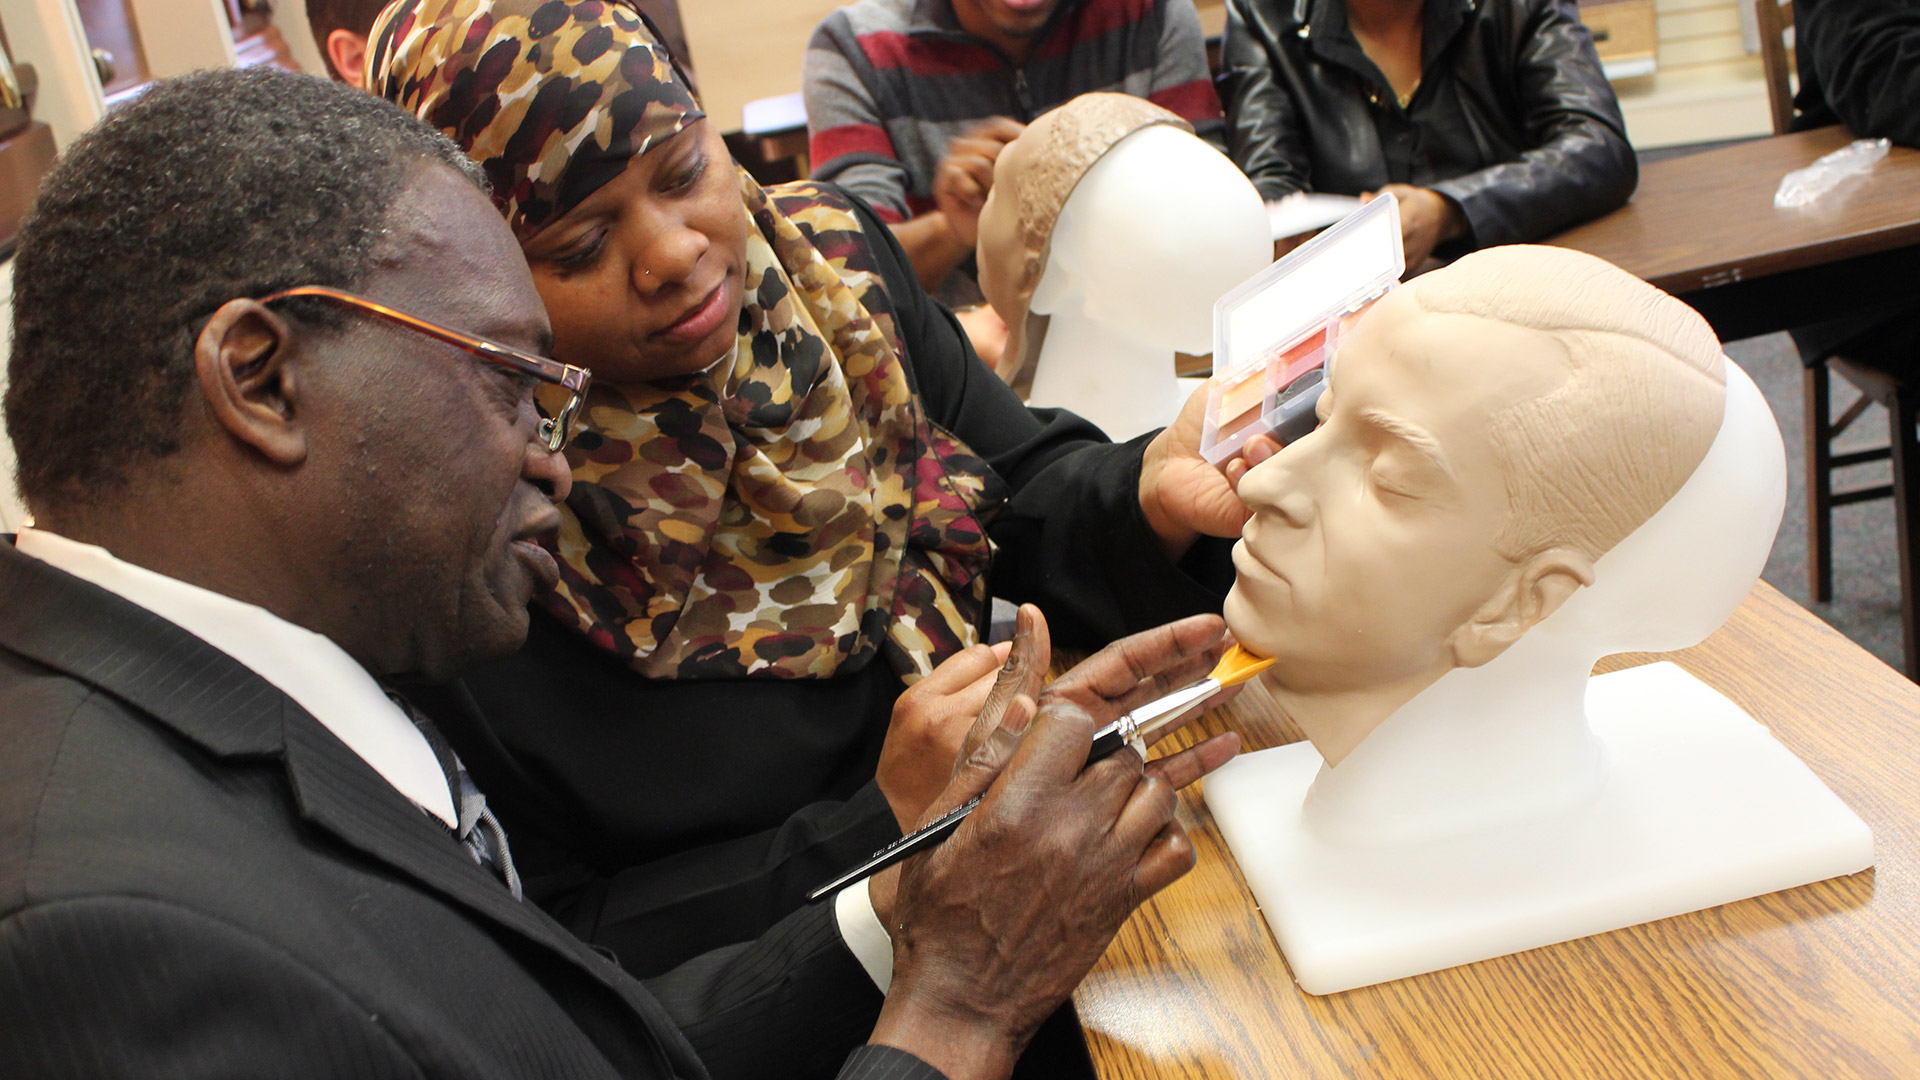 Funeral service students practice applying color to mannequin heads